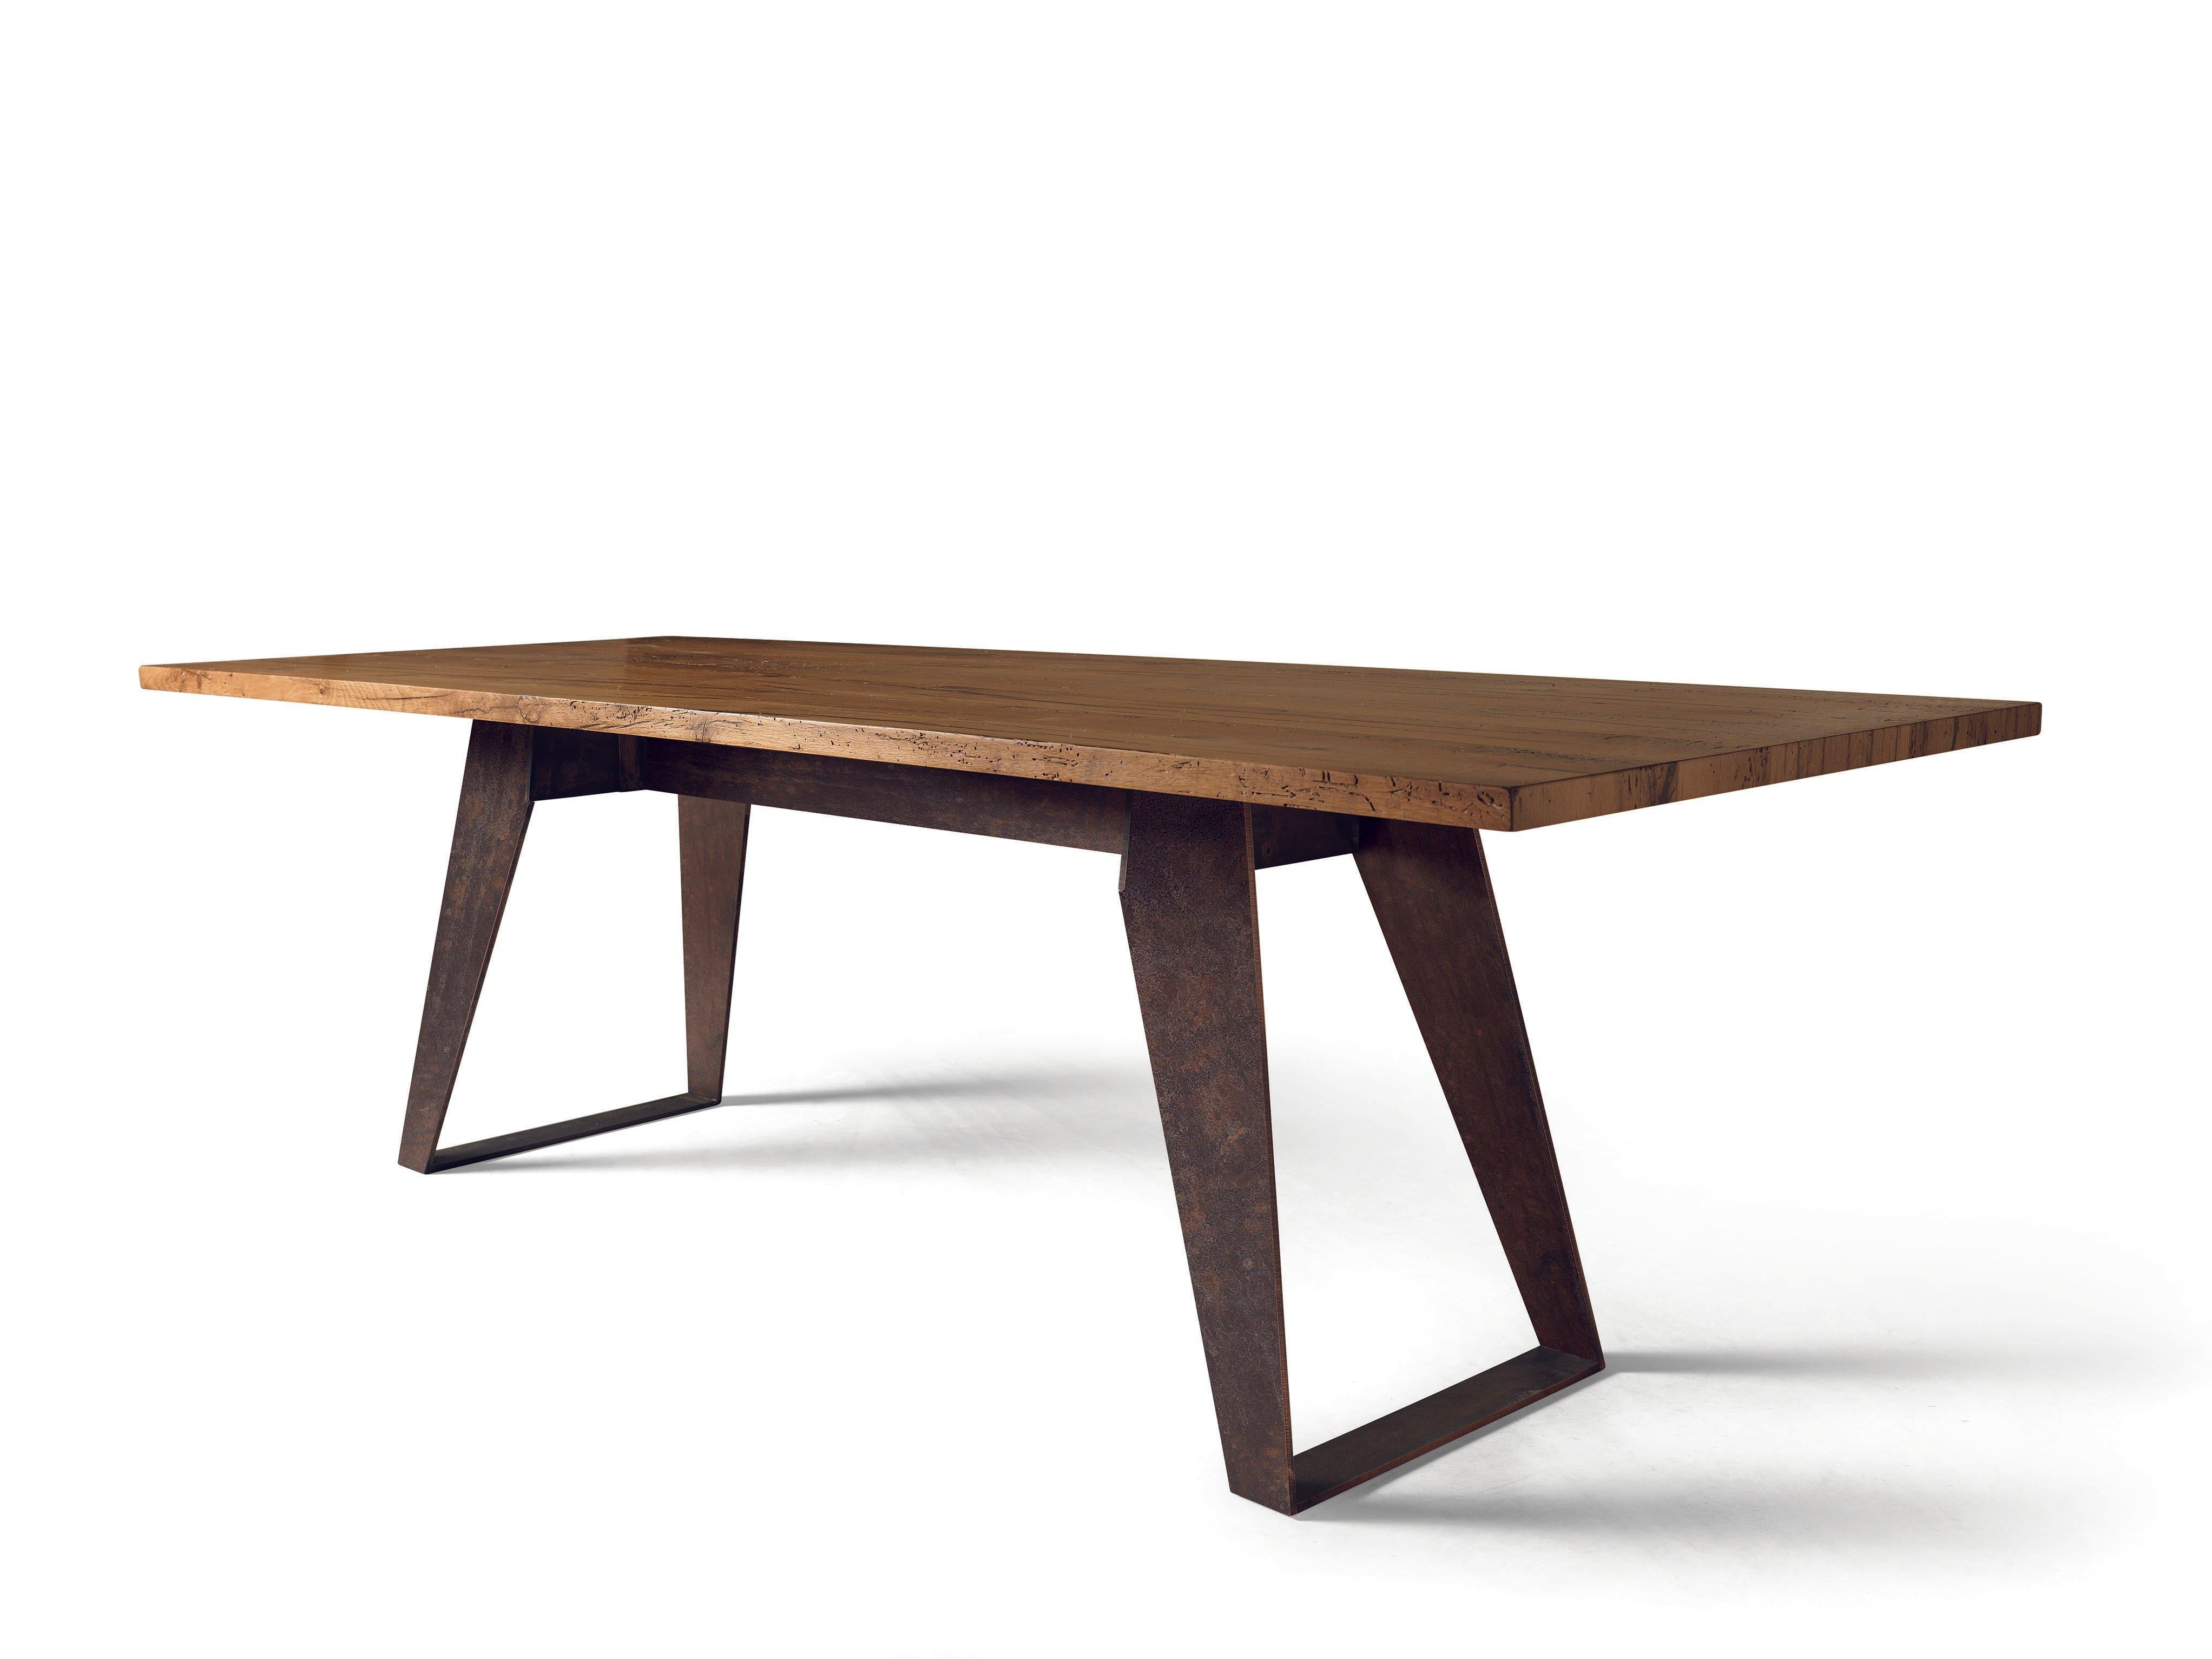 Modern Misura Solid Wood Table, Antique Oak in Hand-Made Natural Finish, Contemporary For Sale